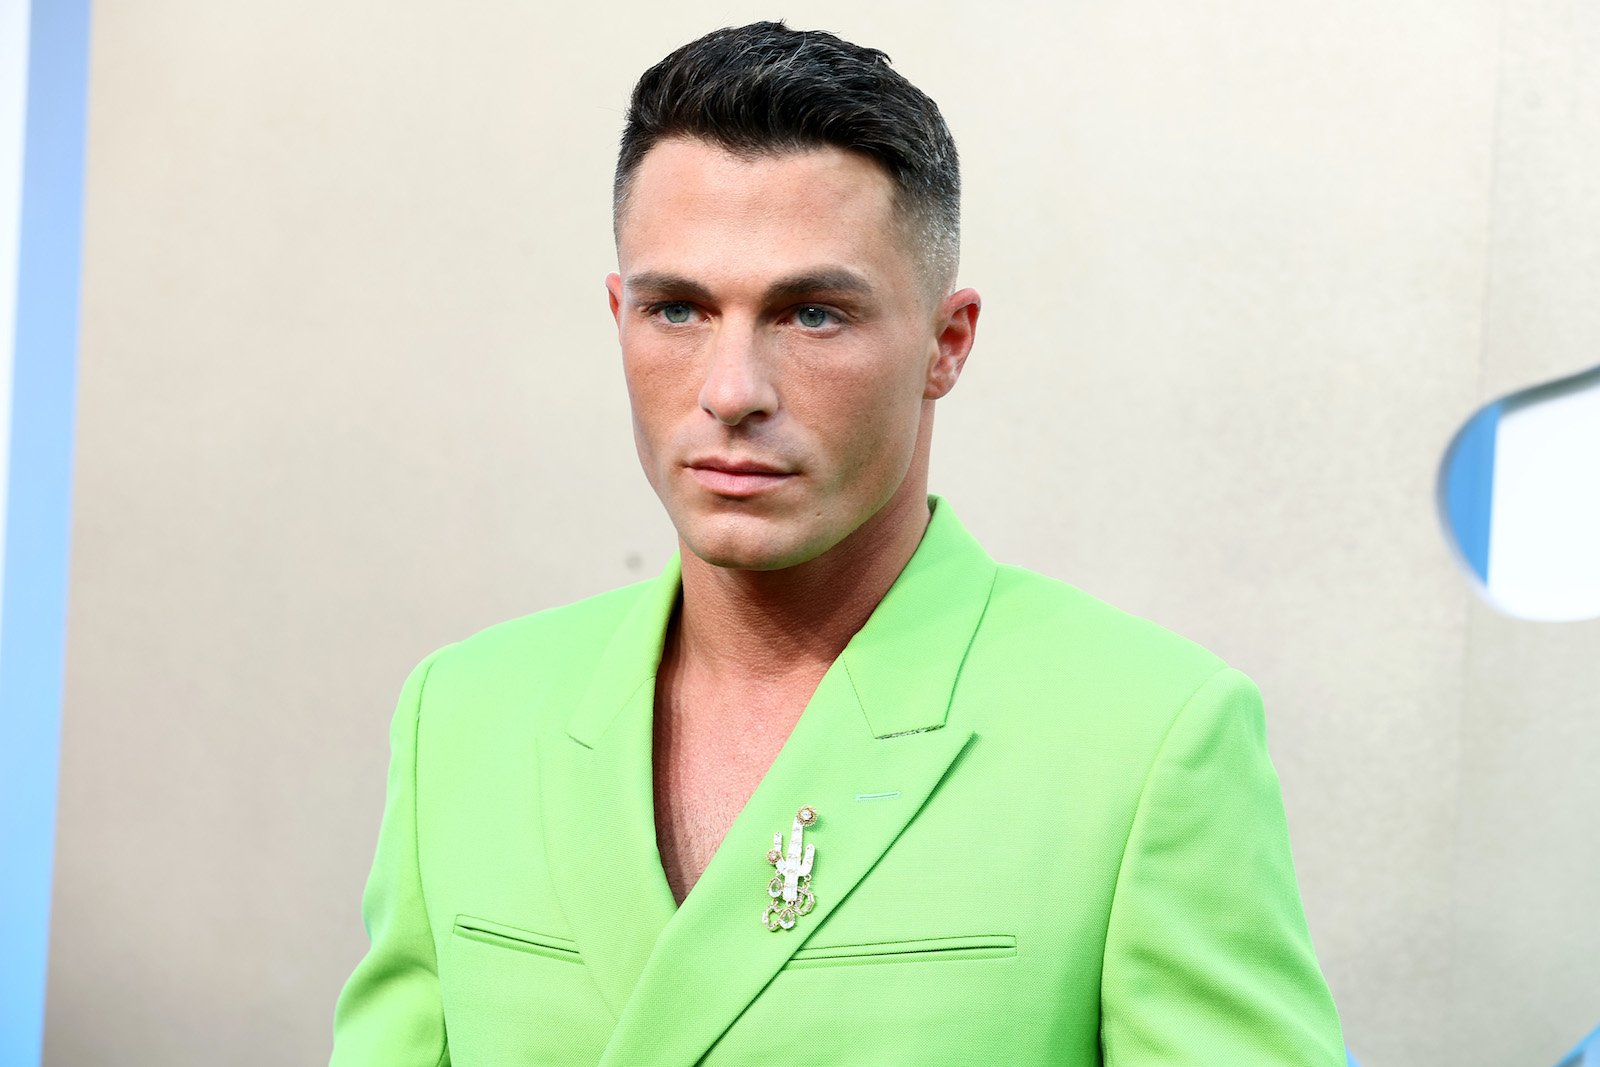 Colton Haynes, A Star From Teen Wolf, Says He Will Never Date Again And Would Have Died If He Hadn't Come Out